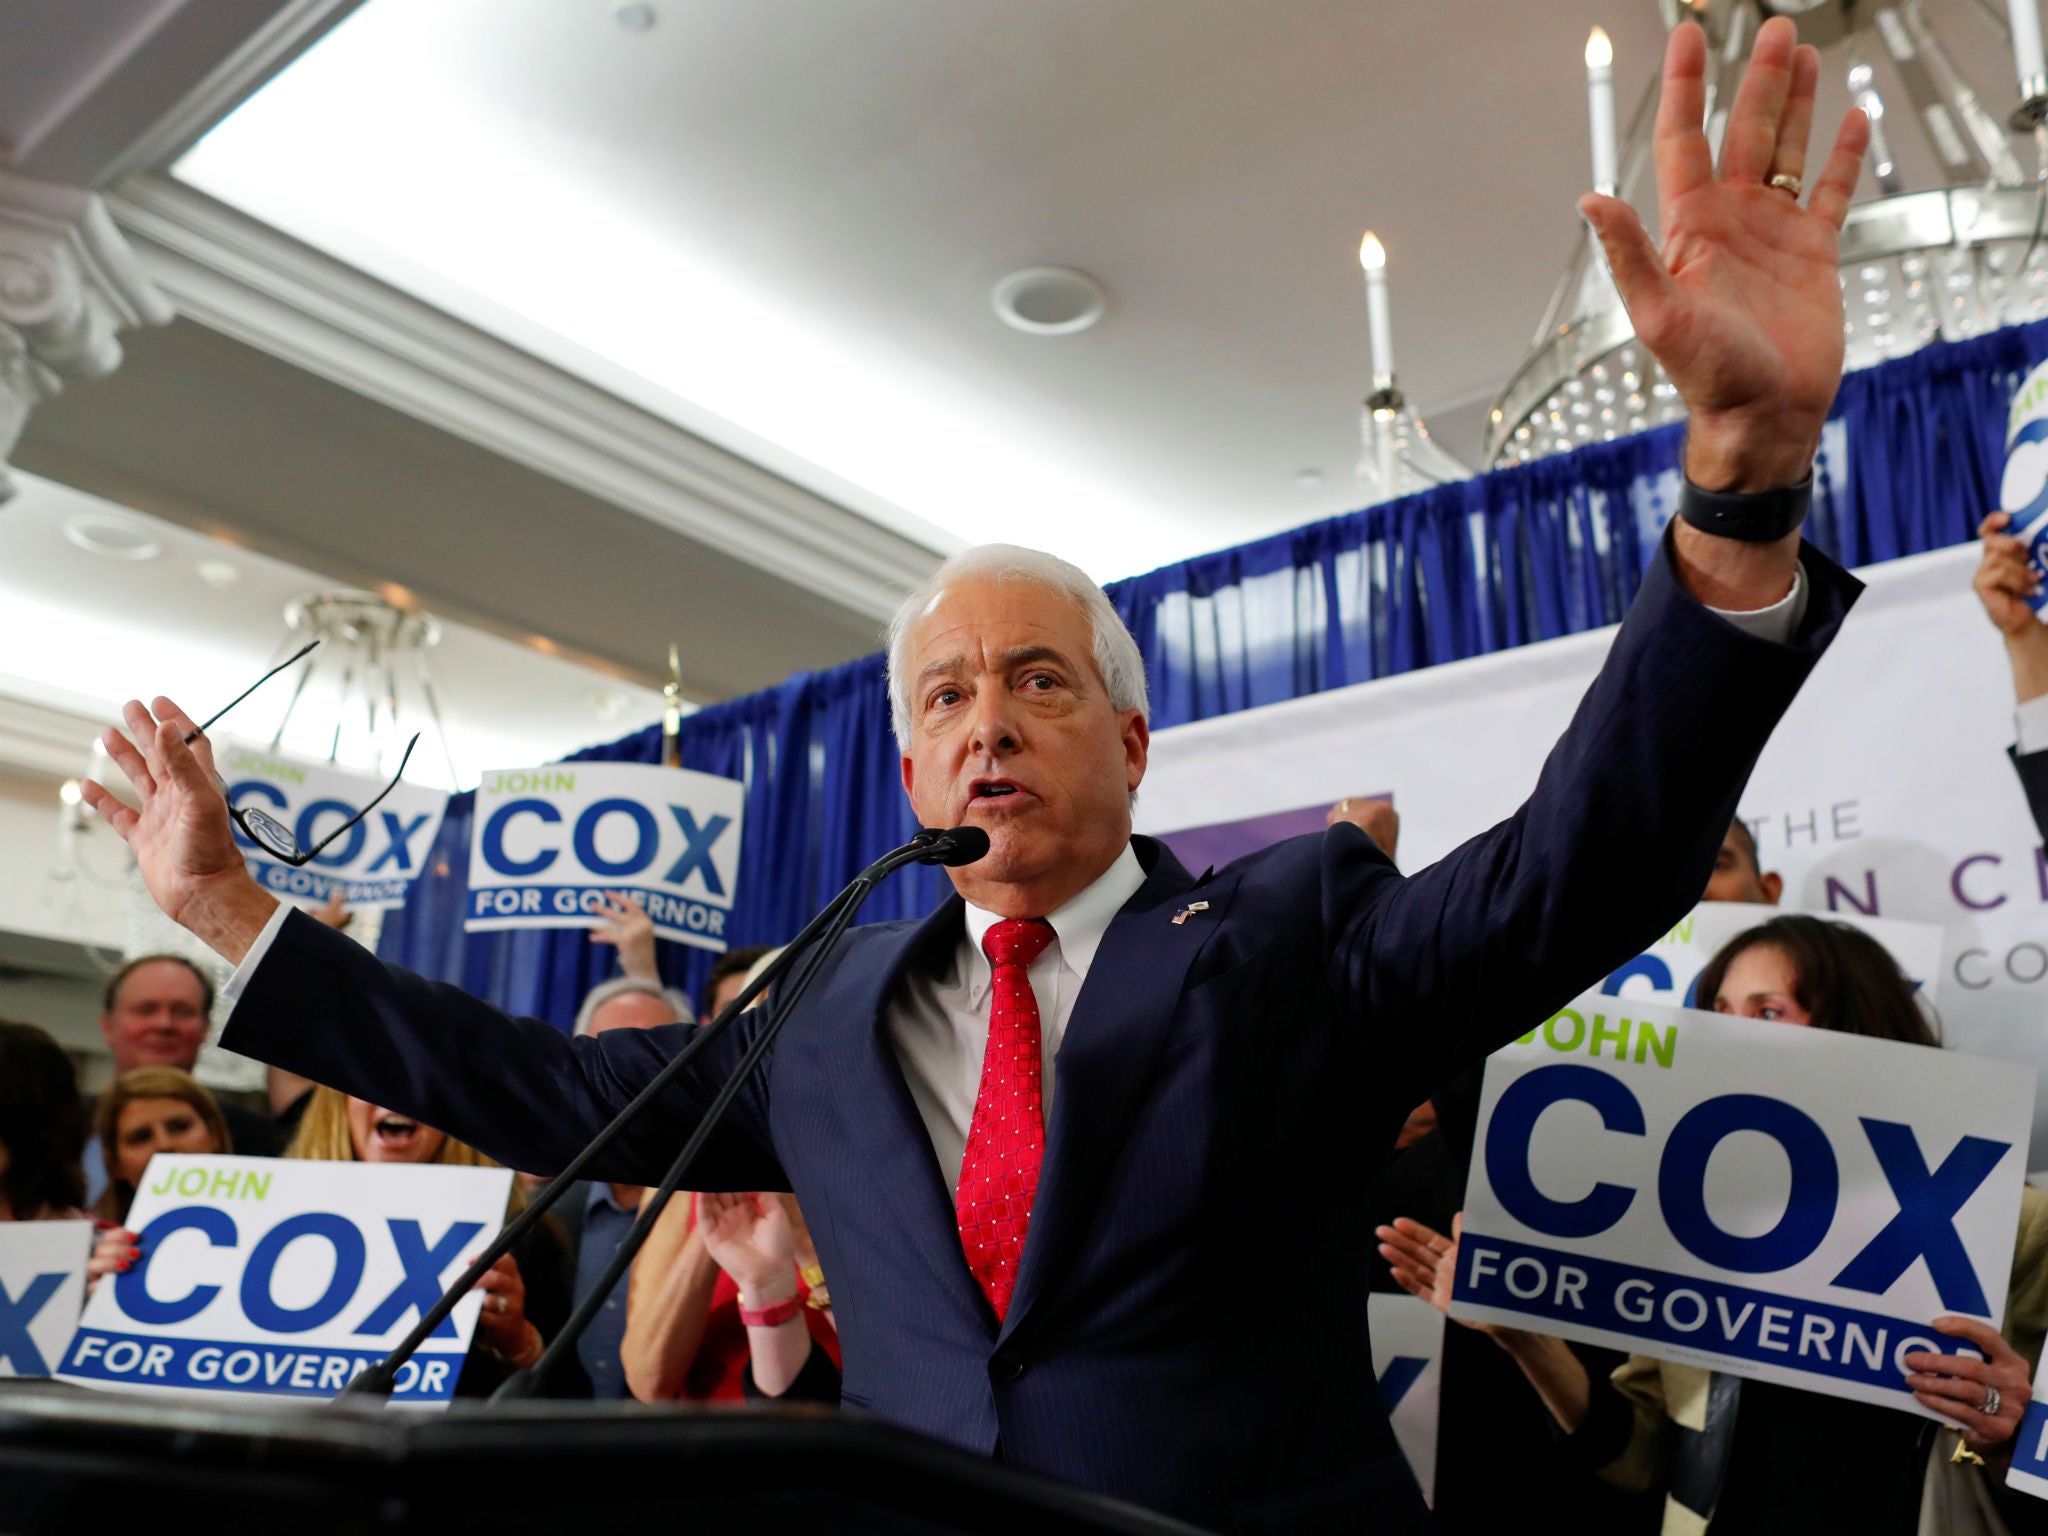 Republican gubernatorial candidate John Cox speaks at his election night headquarters in San Diego, California after placing second in the primary